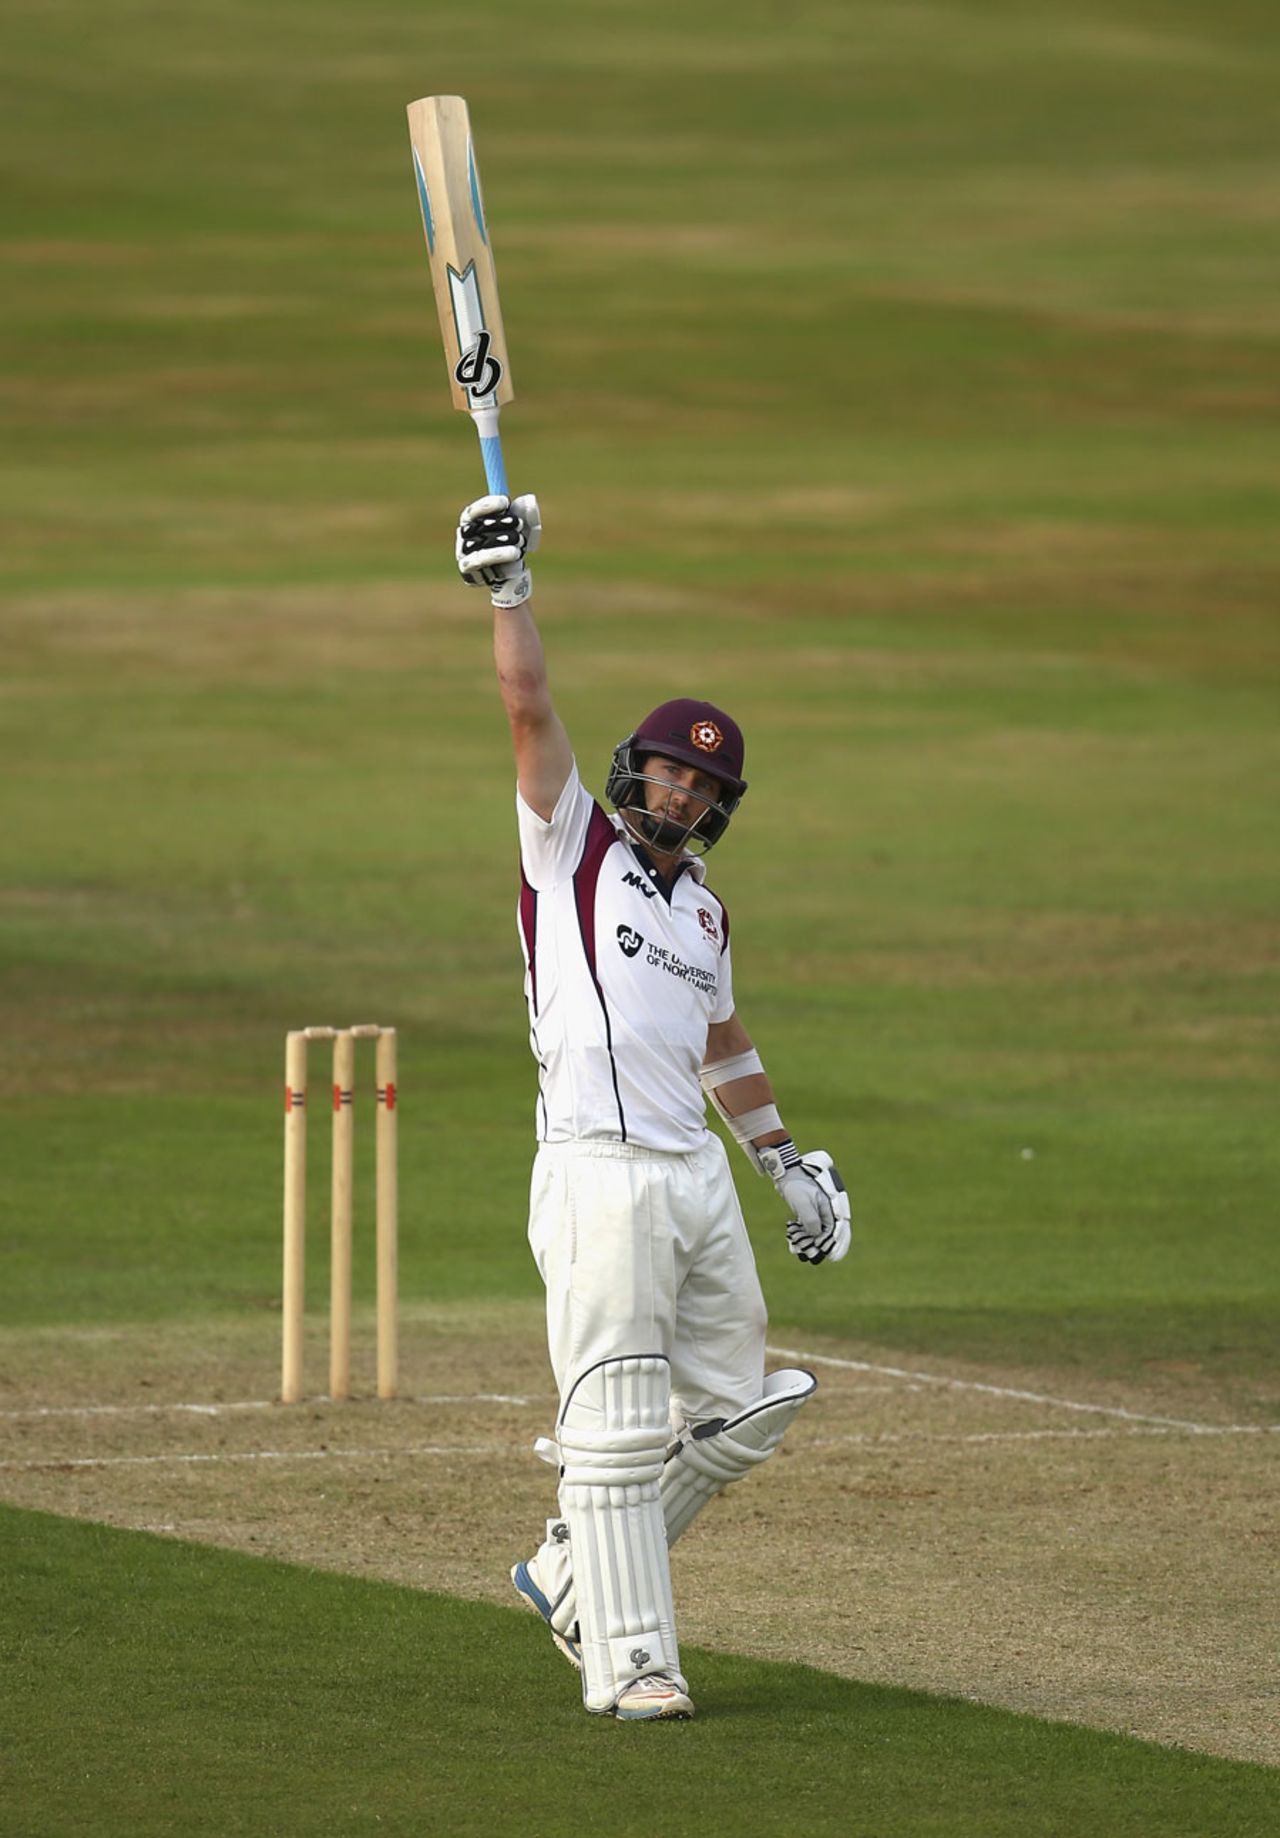 Steven Crook thrashed a hundred against his countrymen, Northamptonshire v Australians, Tour match, Northampton, 2nd day, August 15, 2015